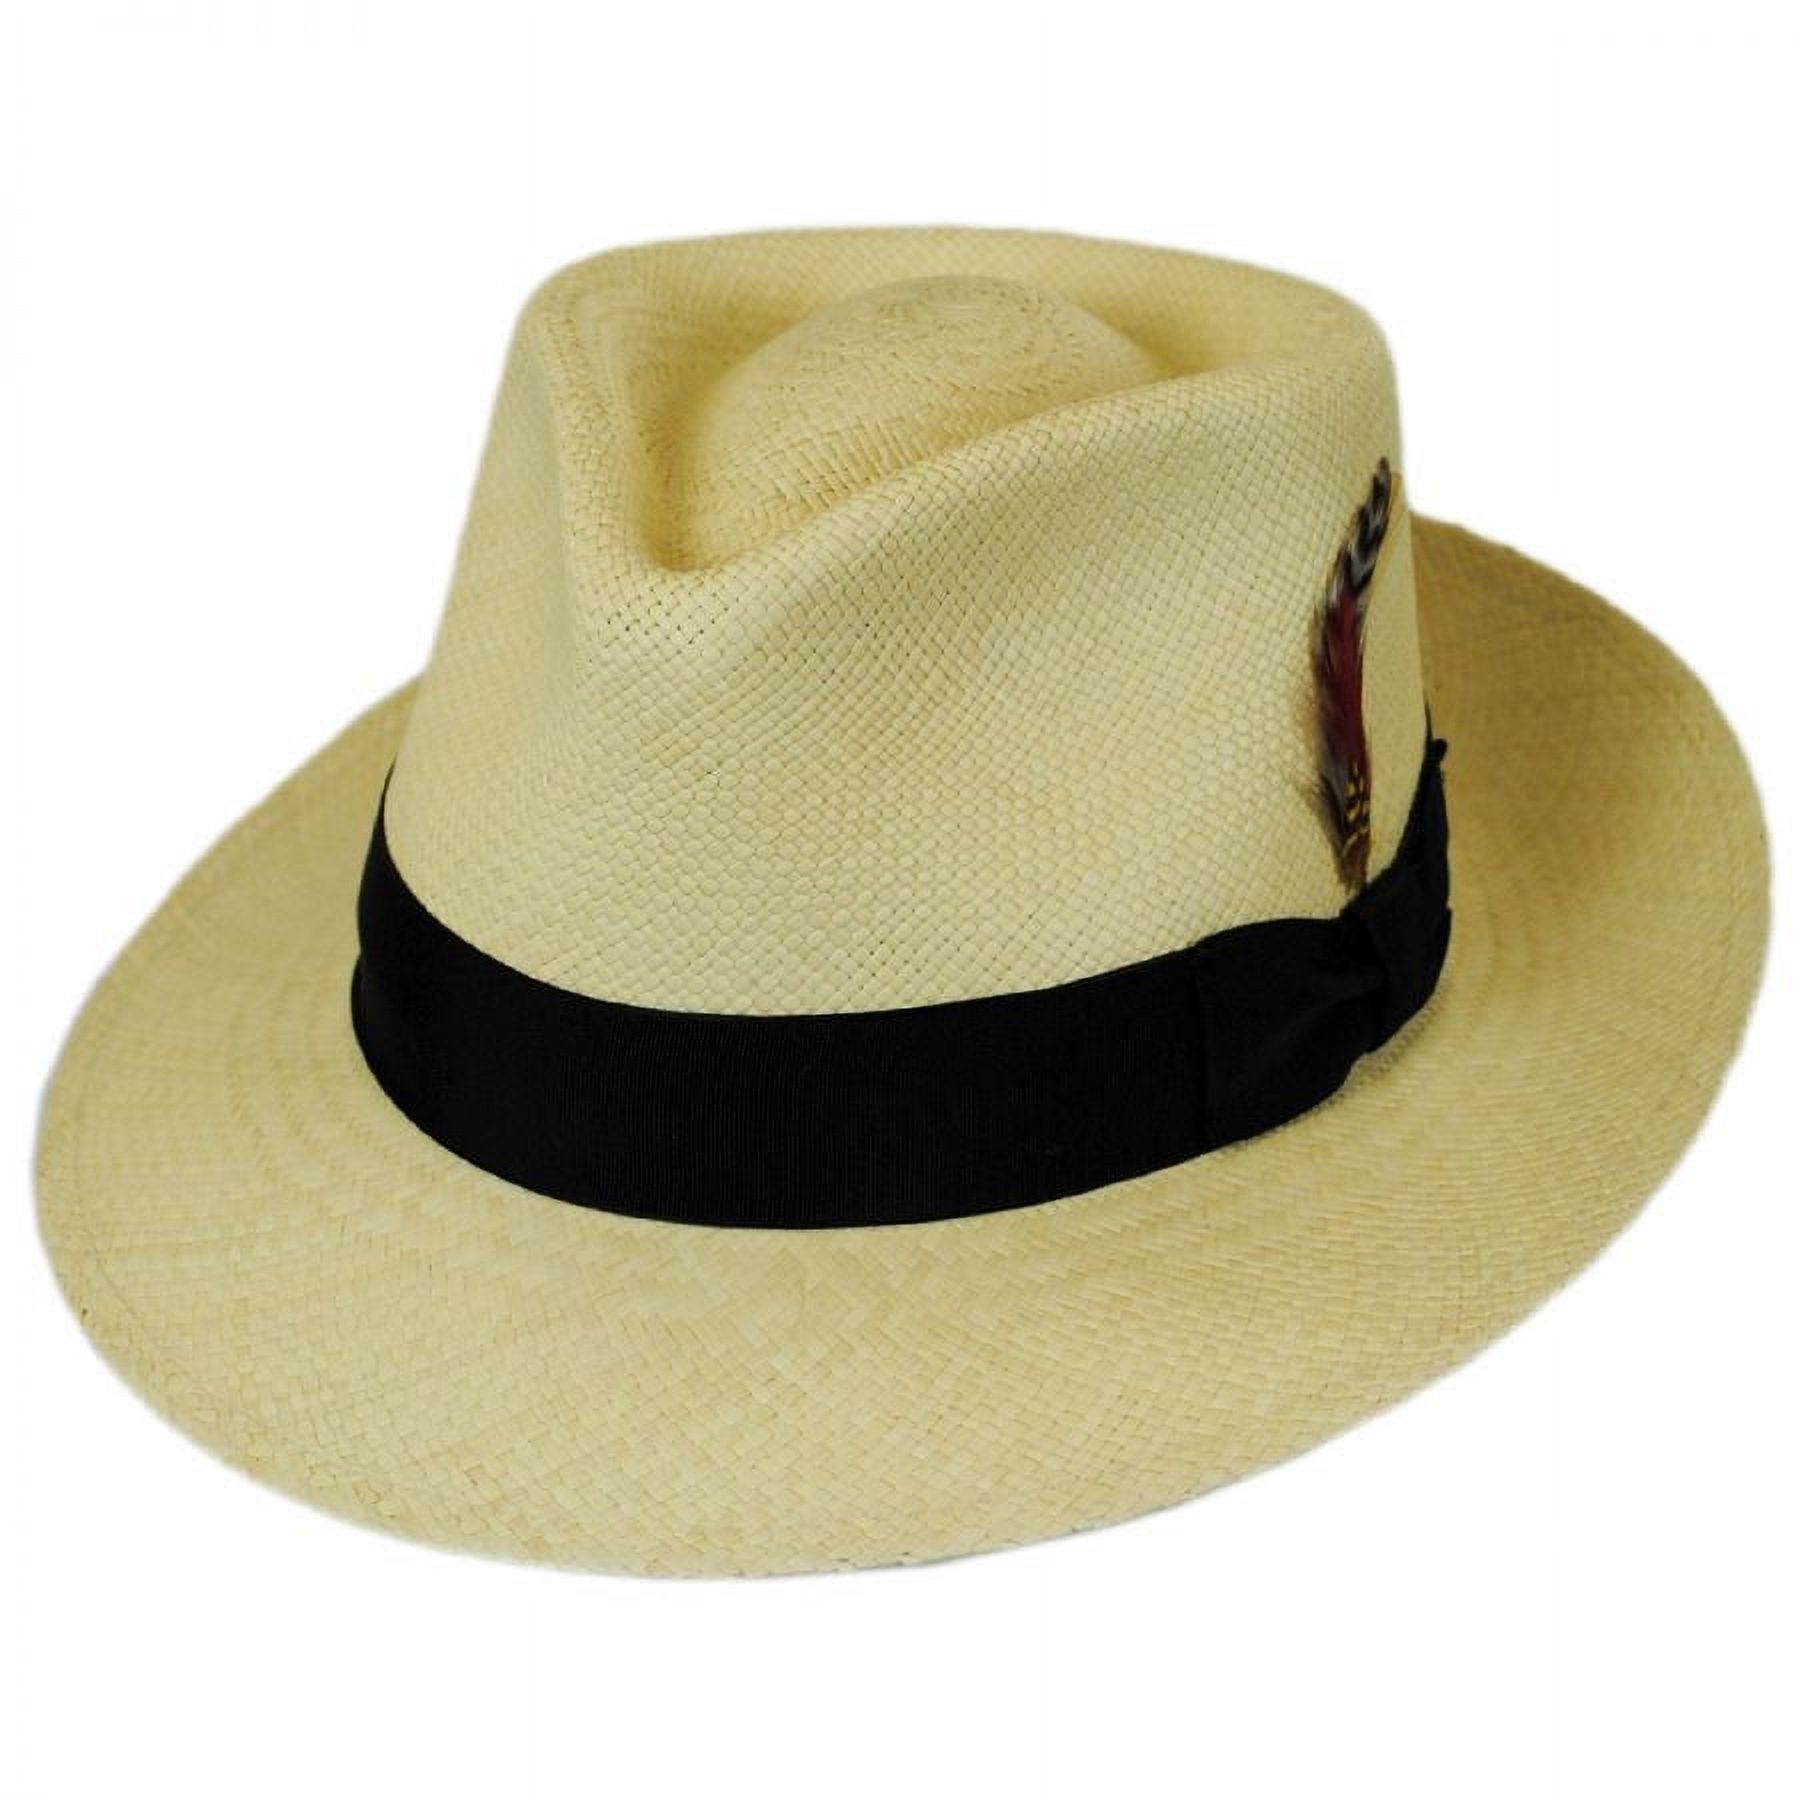 Stain Repellent Panama Straw C-Crown Fedora Hat - XXL - Natural - image 1 of 4